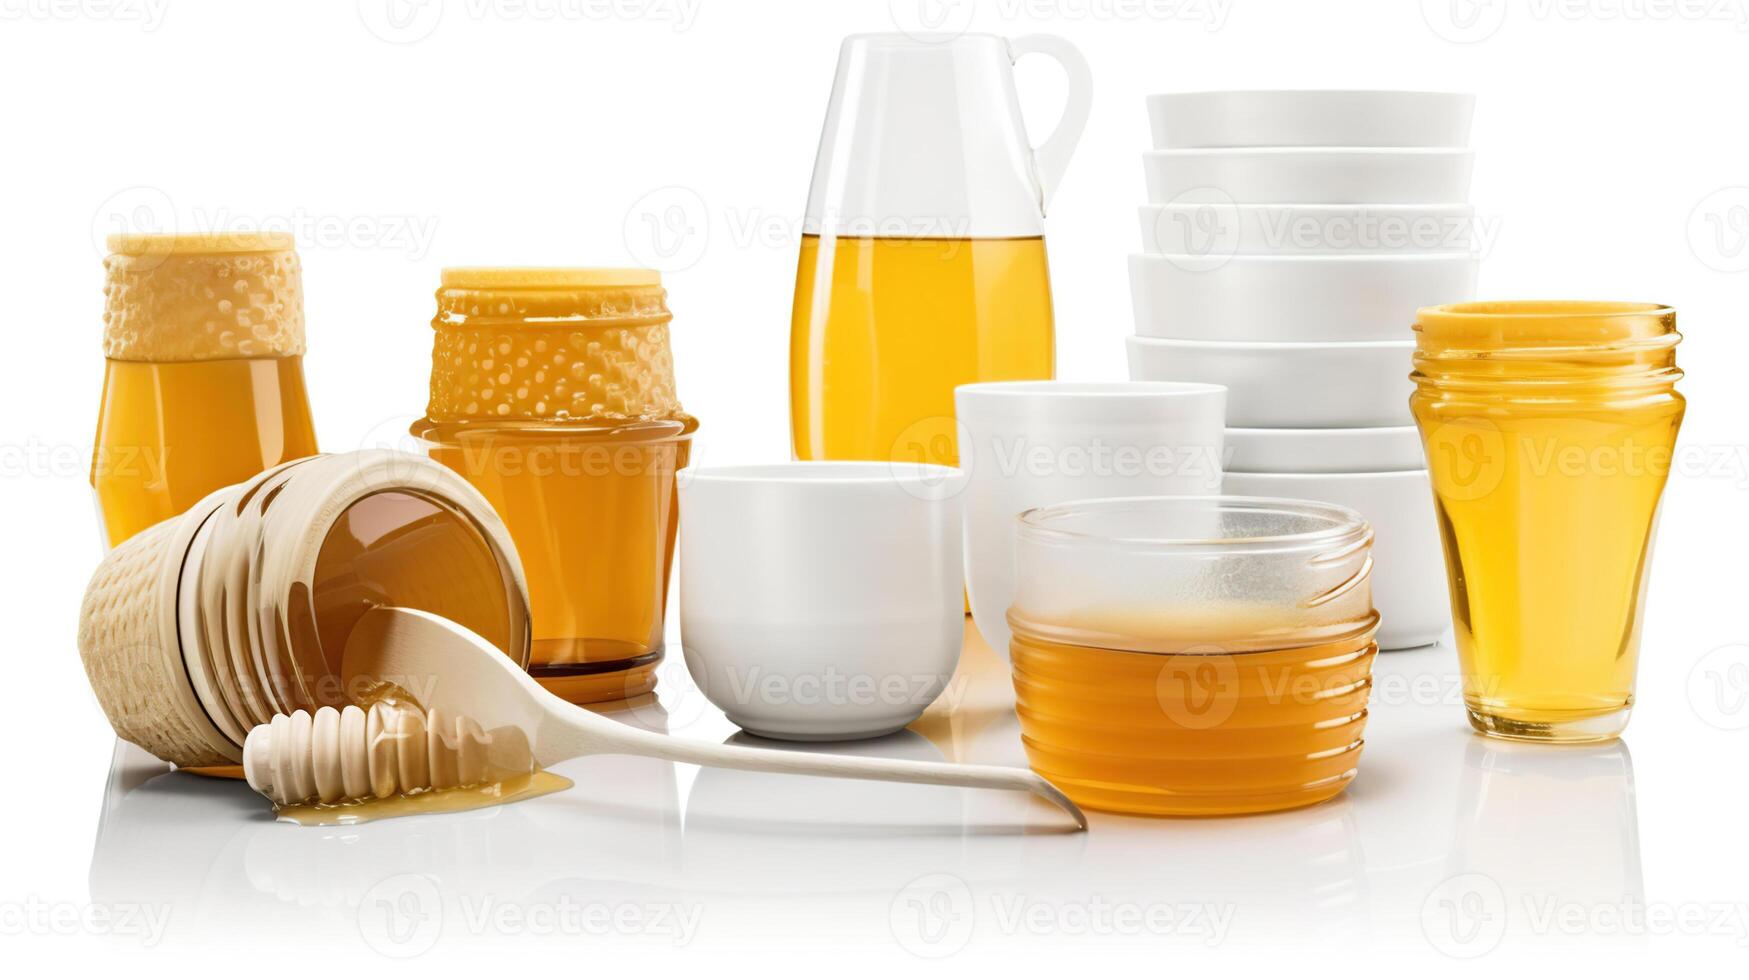 Honey jars, cups and dippers set isolated on white background. Package design elements with clipping path, photo